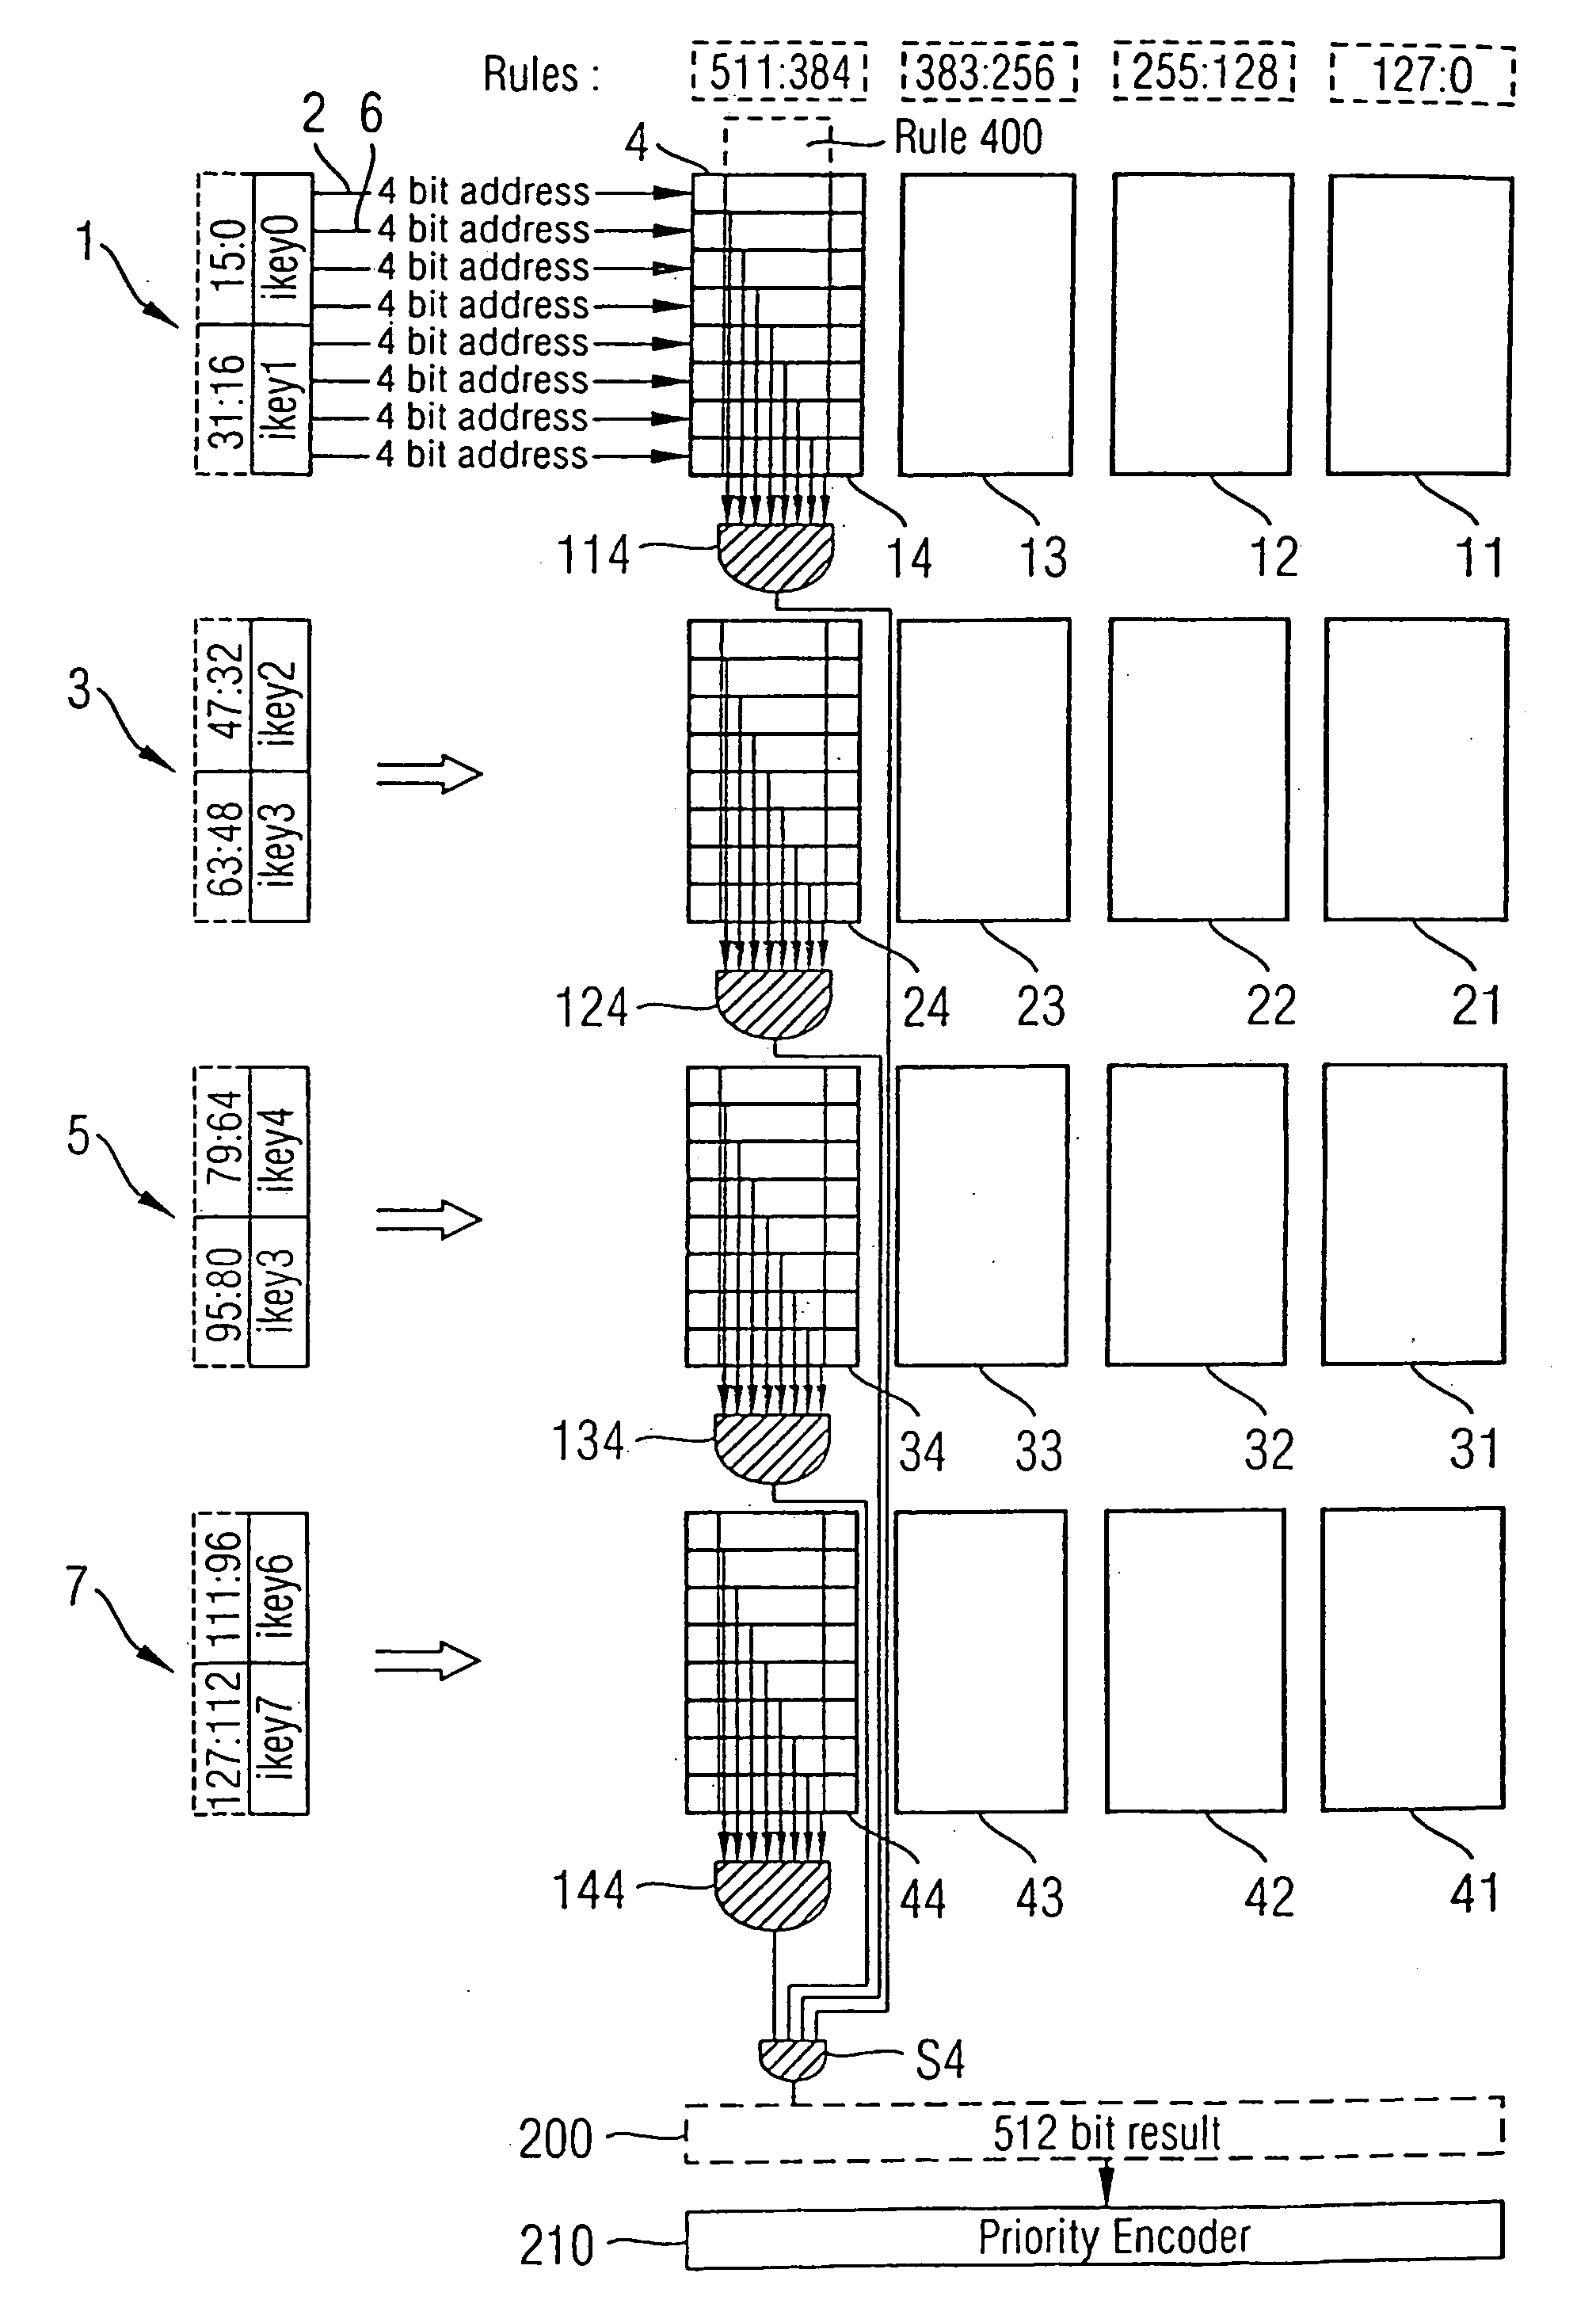 Method and system for determining conformance of a data key with rules by means of memory lookups